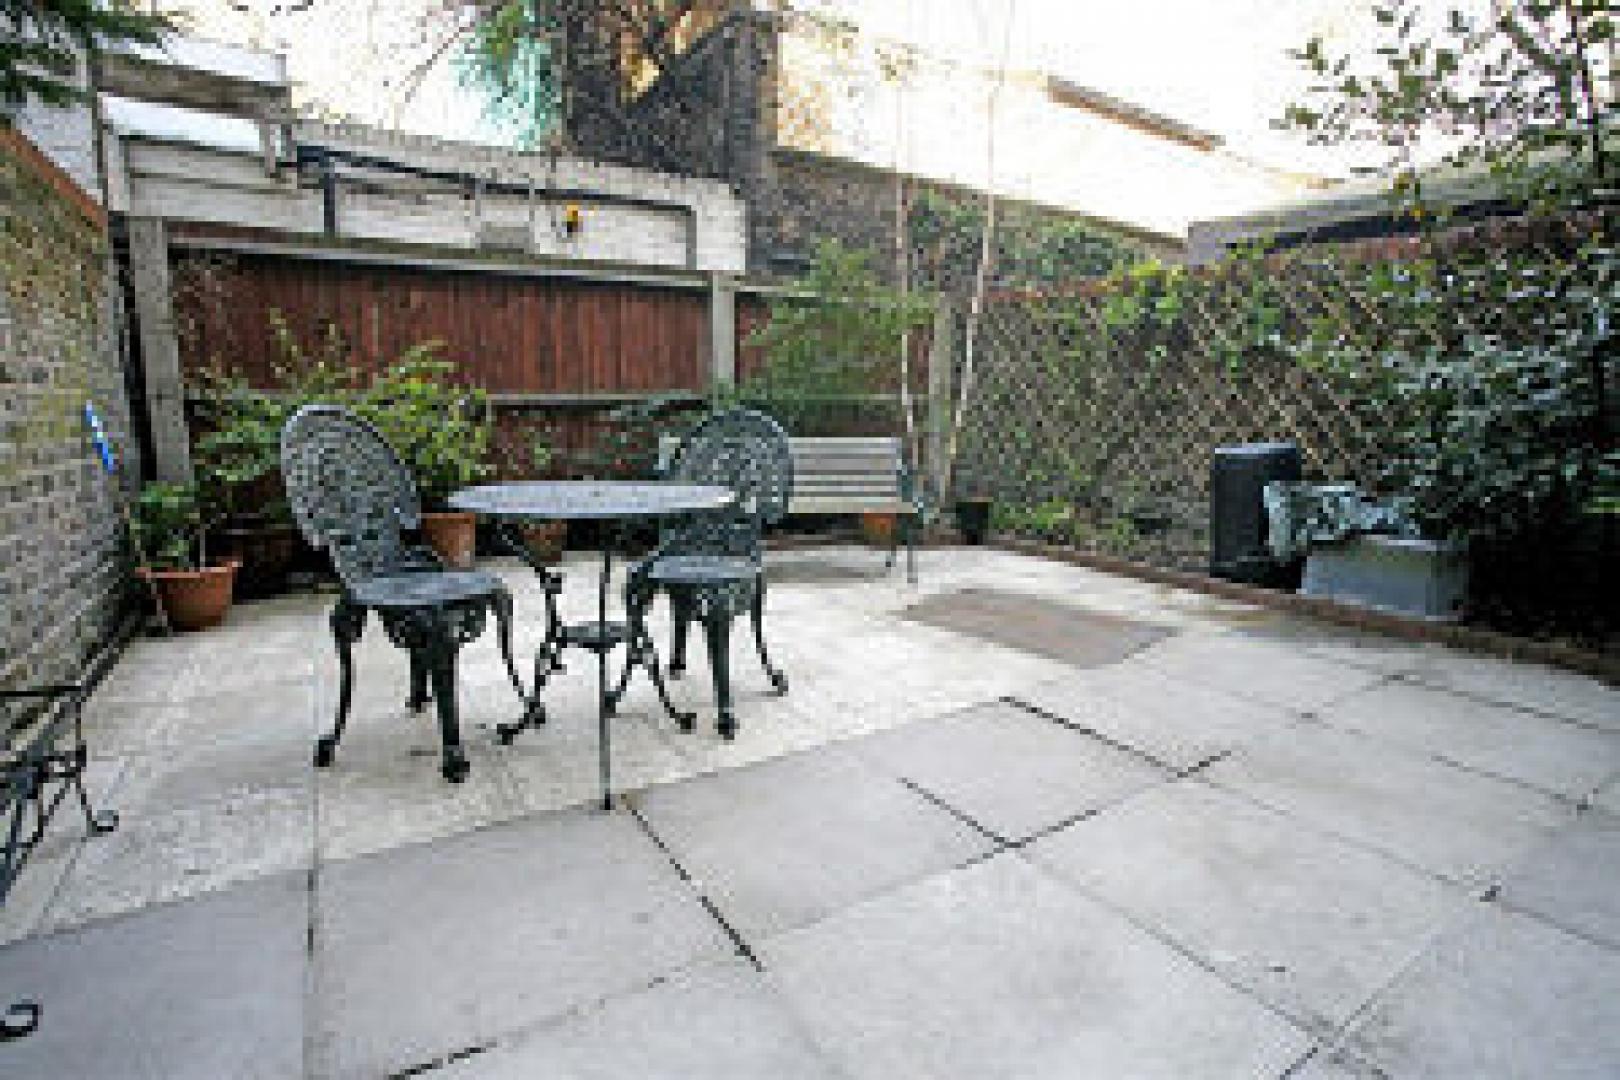 			NEW INSTRUCTION!, 2 Bedroom, 1 bath, 1 reception Flat			 Calthorpe Street, KINGS CROSS-RUSSELL SQUARE